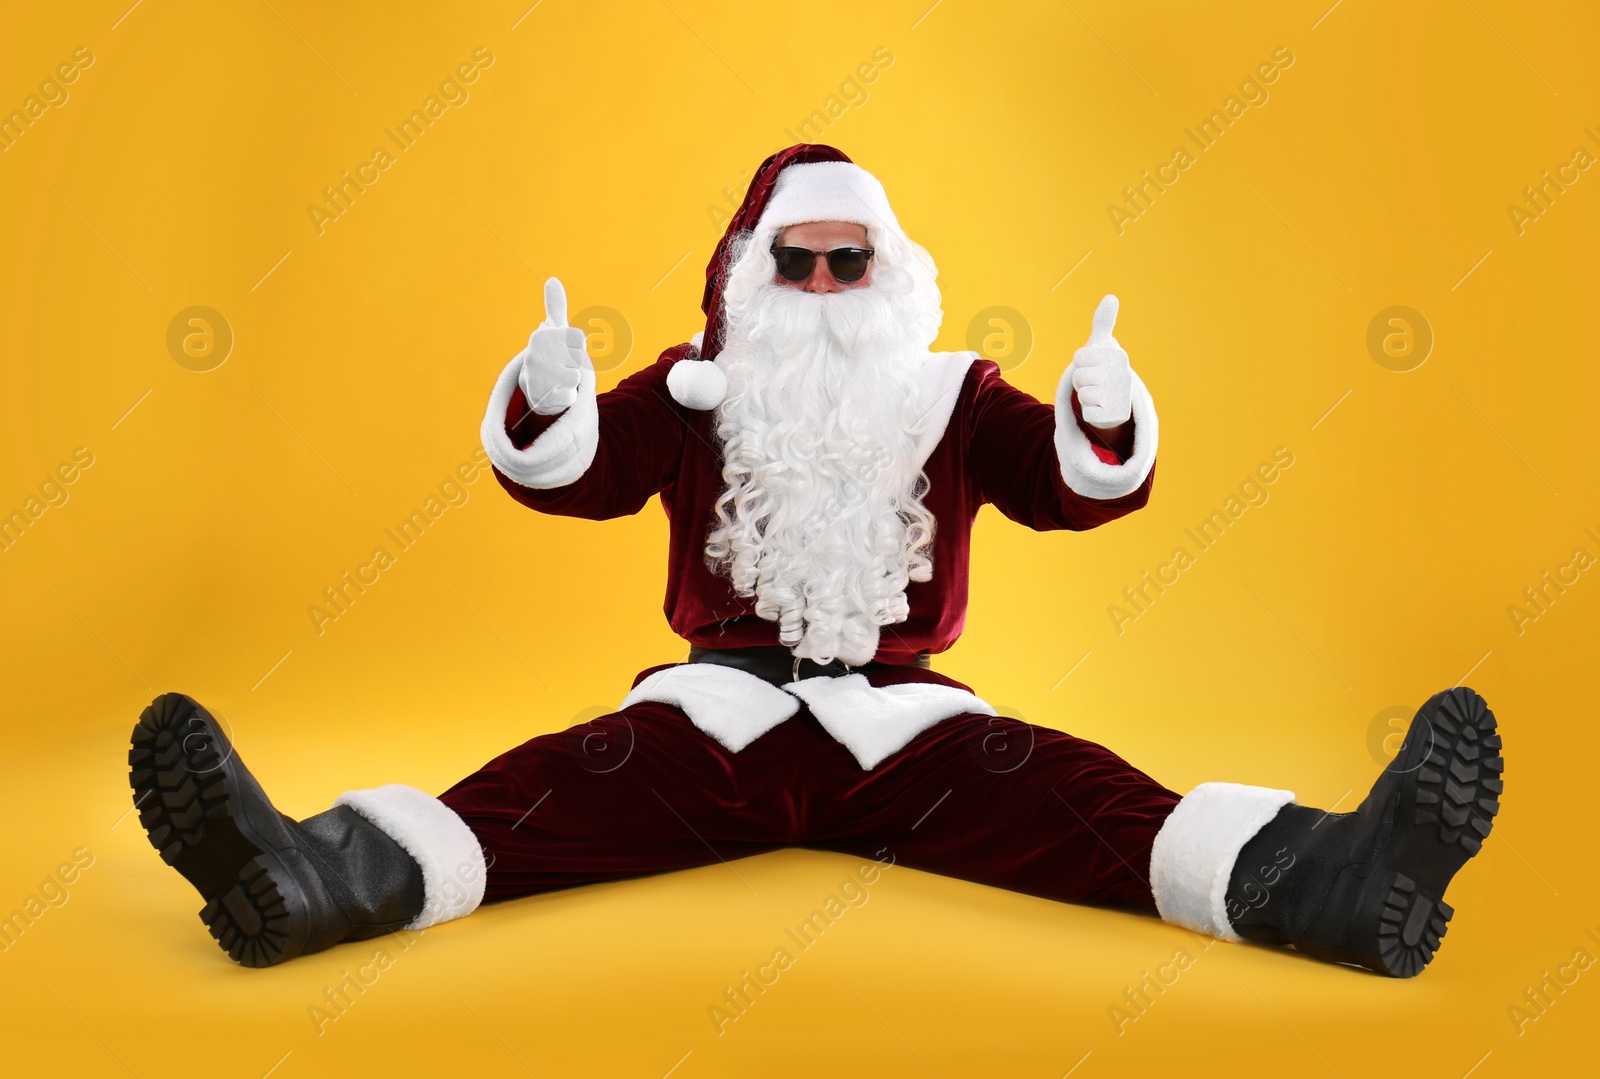 Photo of Santa Claus with sunglasses on yellow background